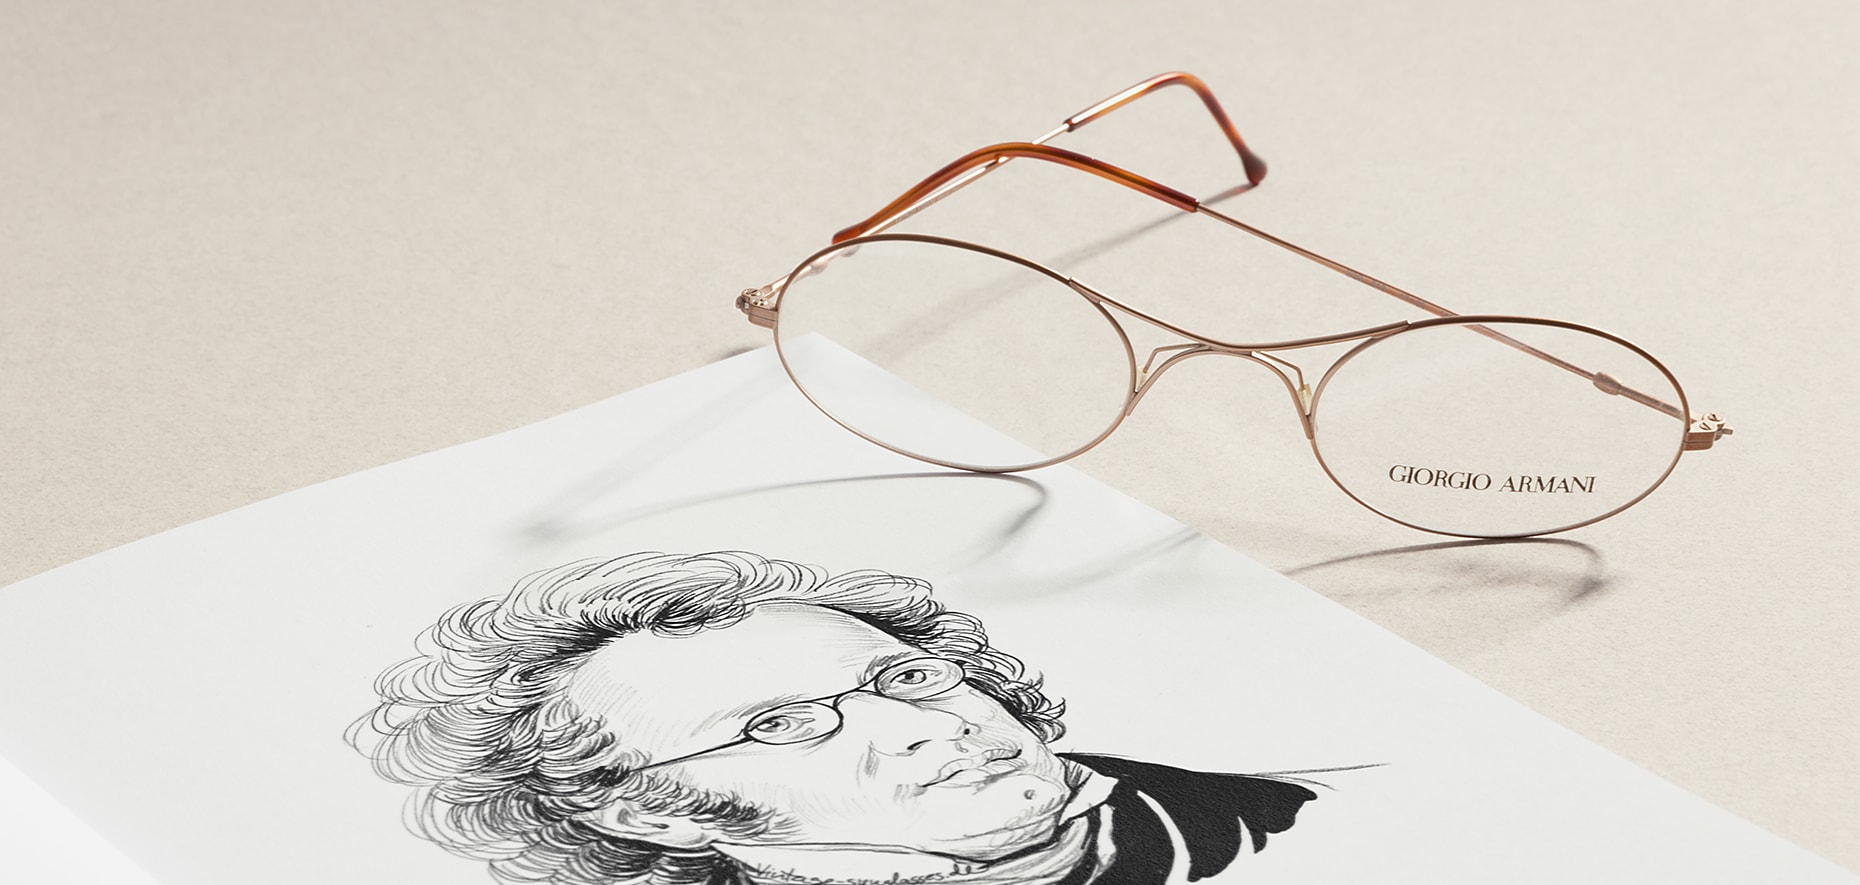 Vintage glasses by Giorgio Armani with a portrait of Schubert